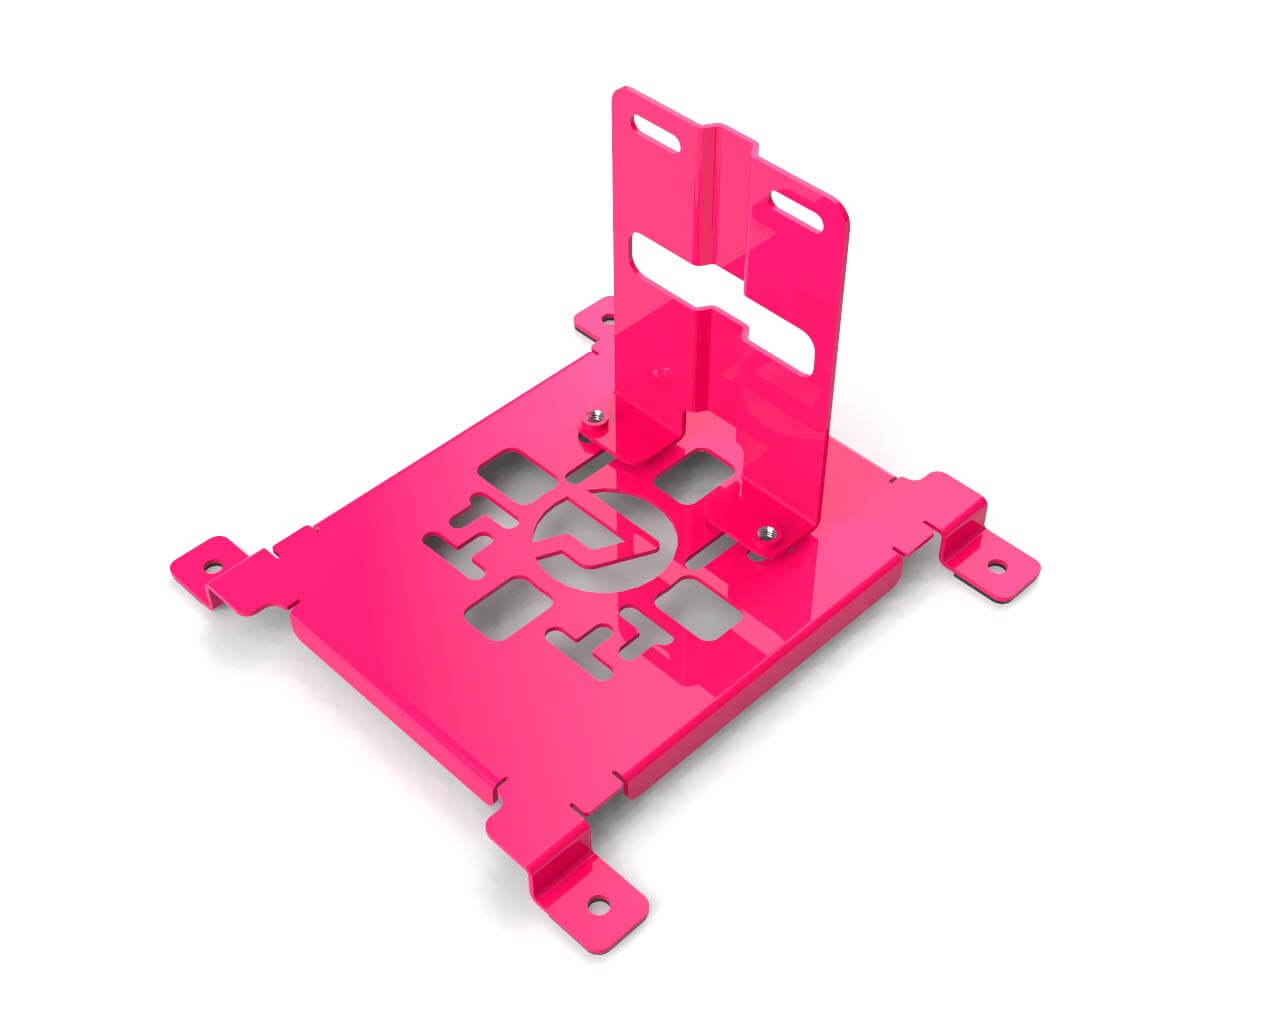 PrimoChill SX CTR2 Spider Mount Bracket Kit - 140mm Series - PrimoChill - KEEPING IT COOL UV Pink